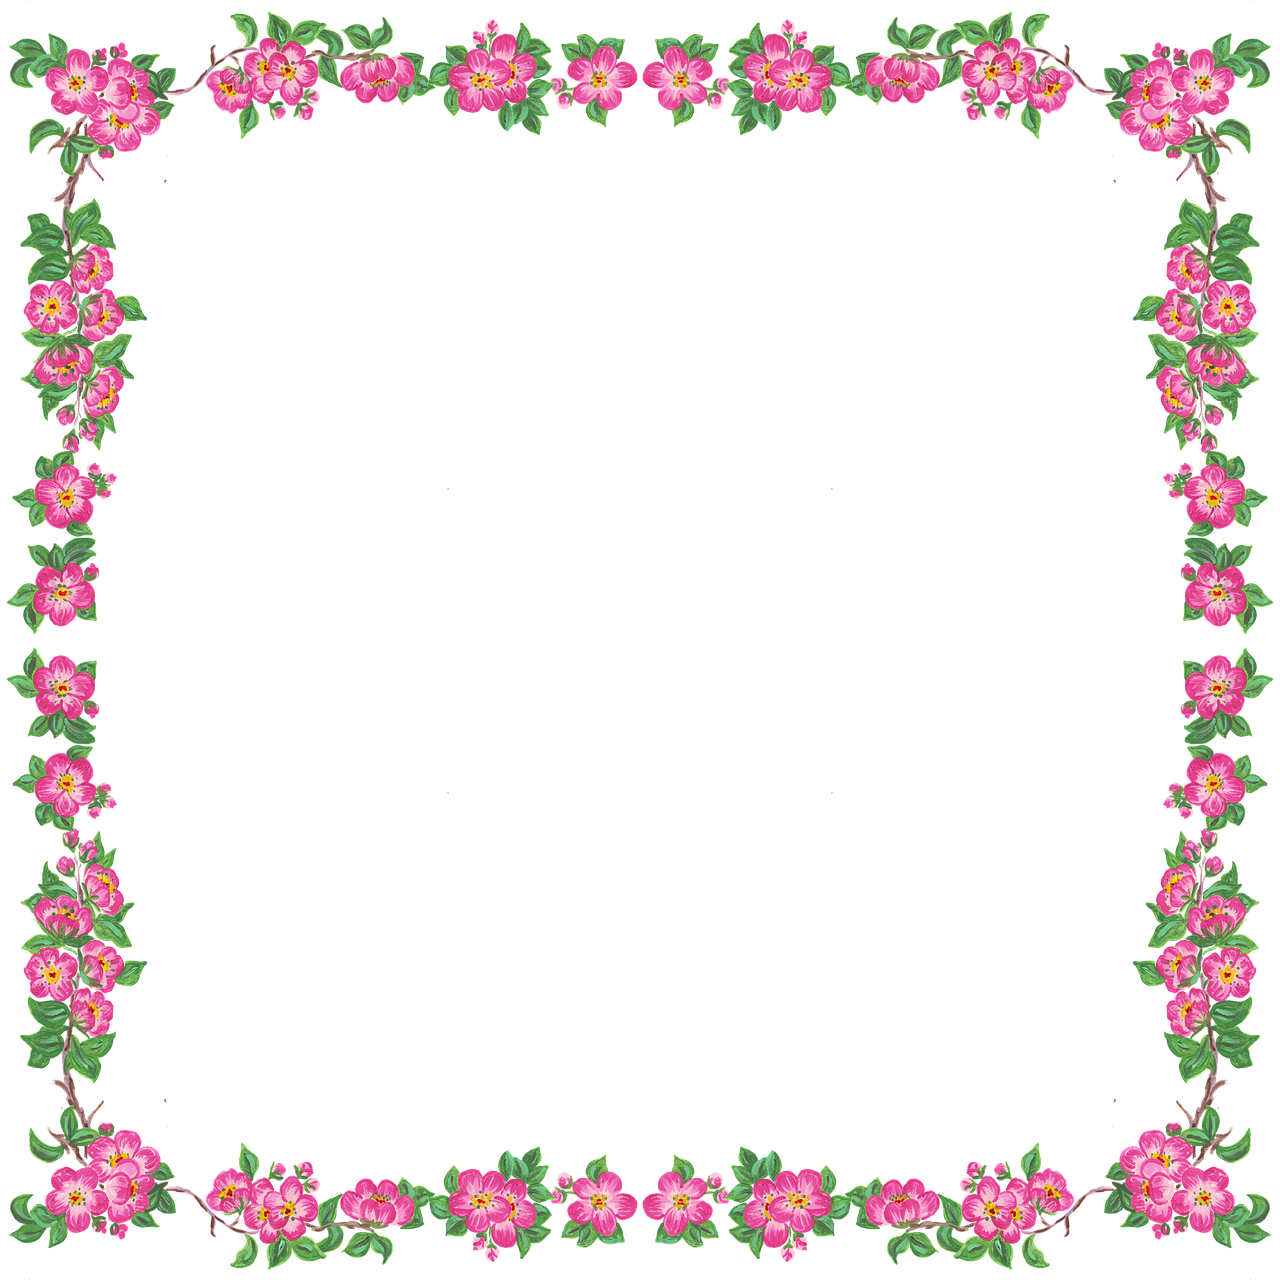 a black background with pink flowers and green leaves, a digital rendering, flickr, ornate border frame, black backround. inkscape, colorful picture, 3 2 x 3 2